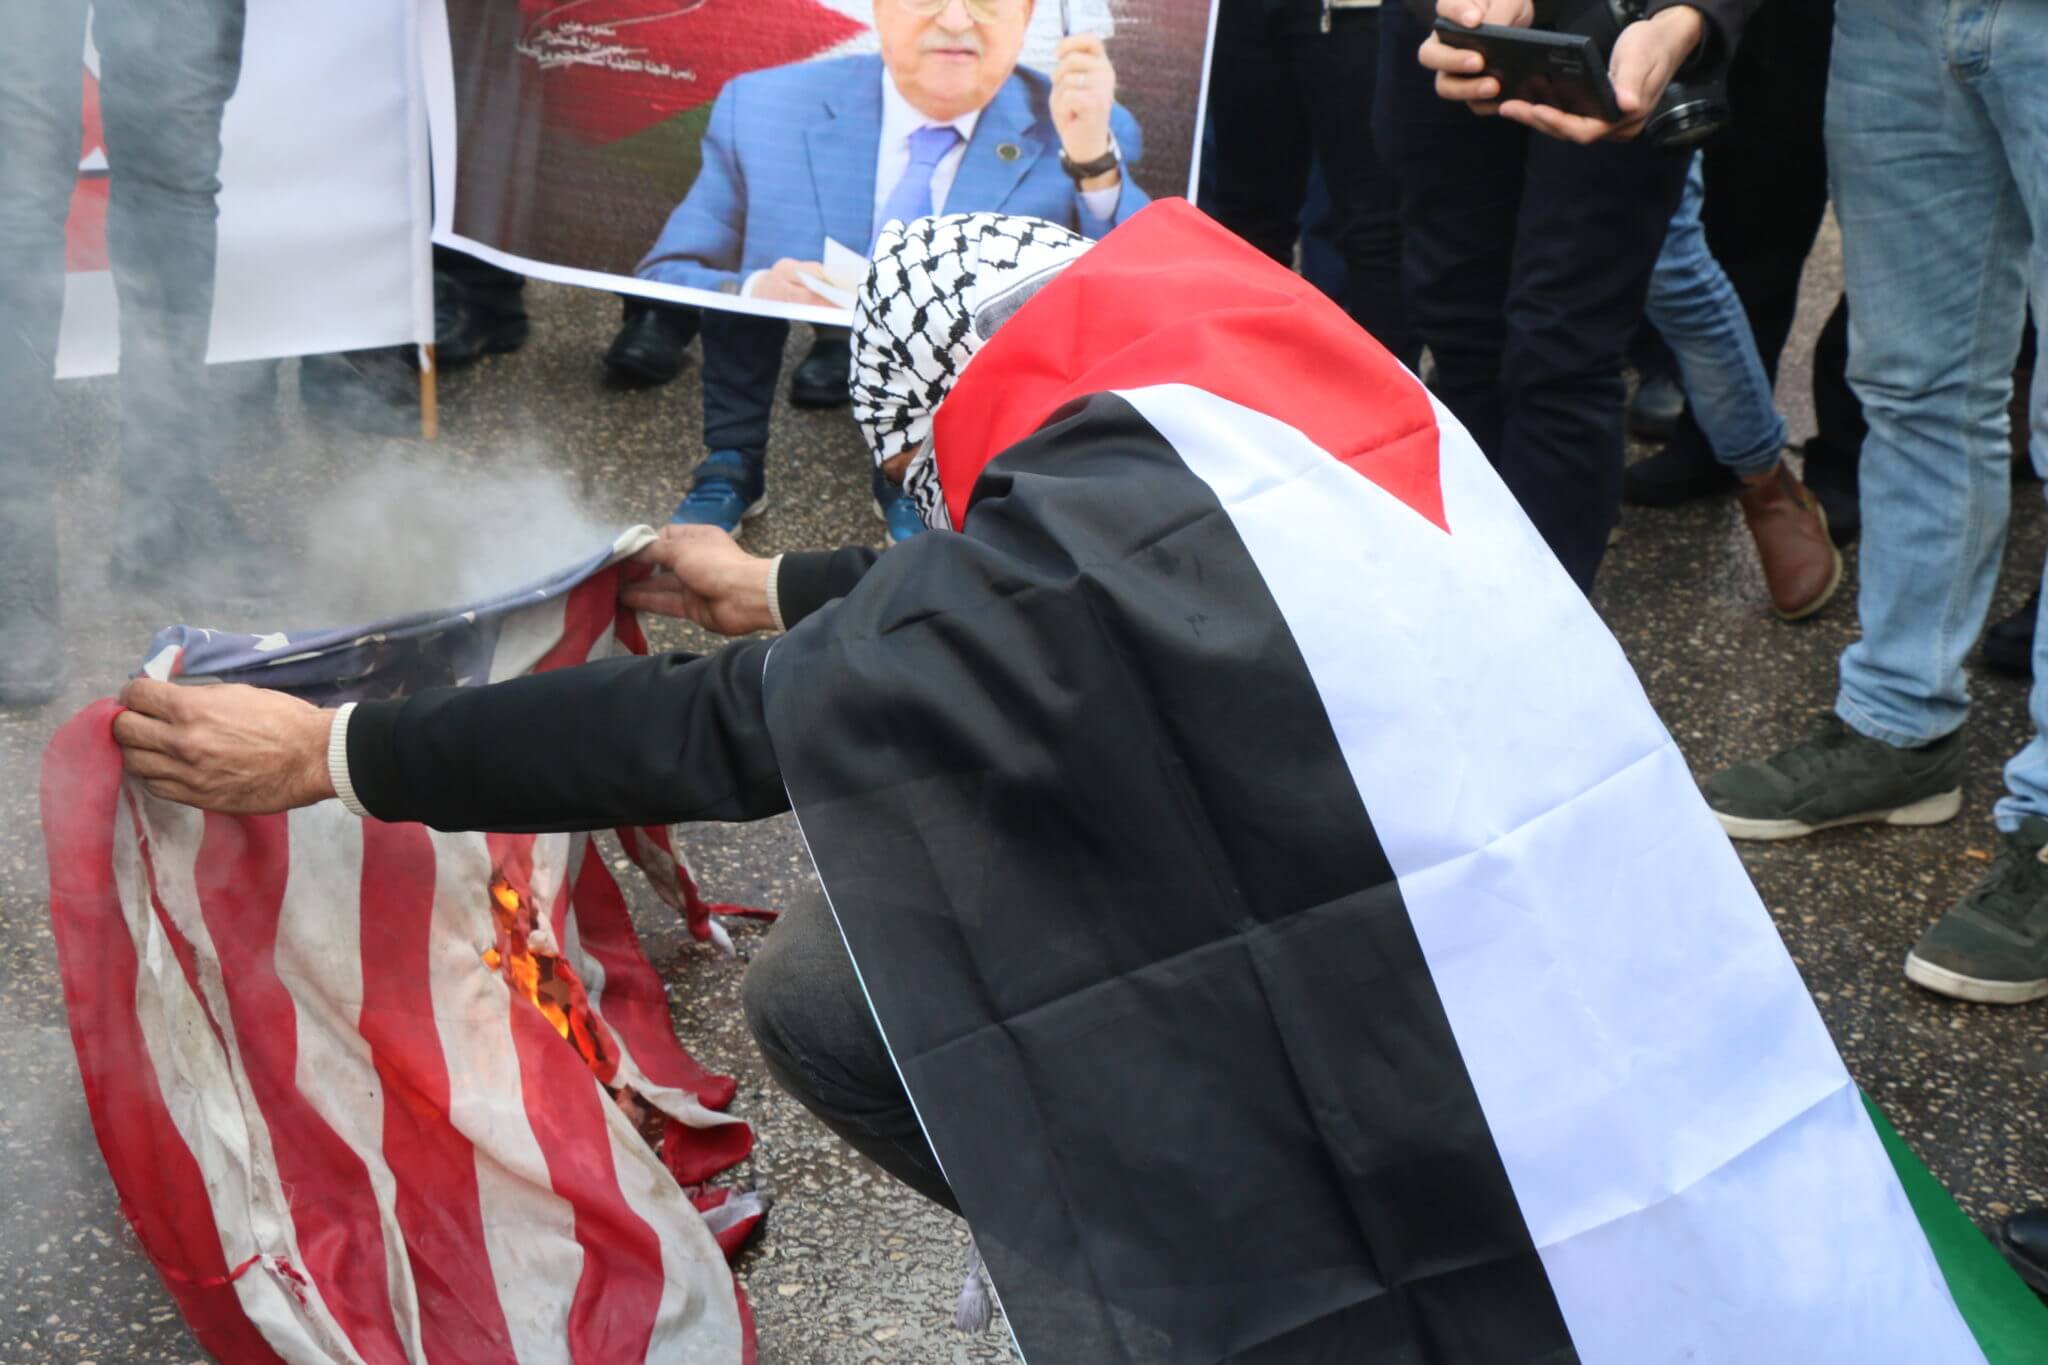 A Palestinian demonstrator burns the American flag in Bethlehem in protest of US President Donald Trump's peace plan. (Photo: Yumna Patel)